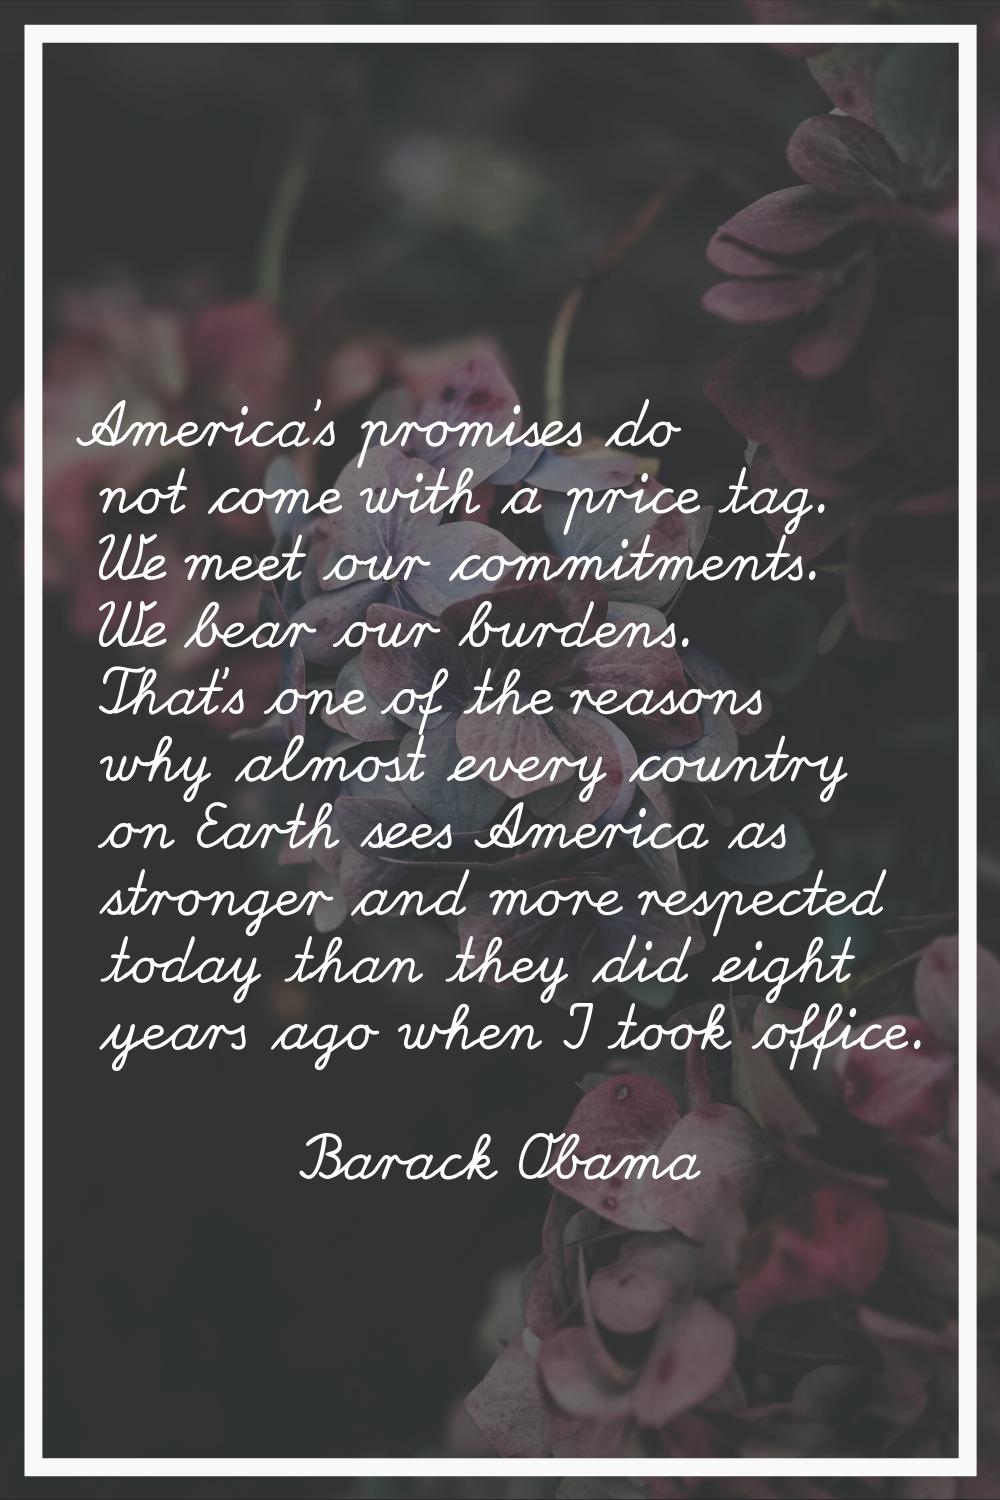 America's promises do not come with a price tag. We meet our commitments. We bear our burdens. That